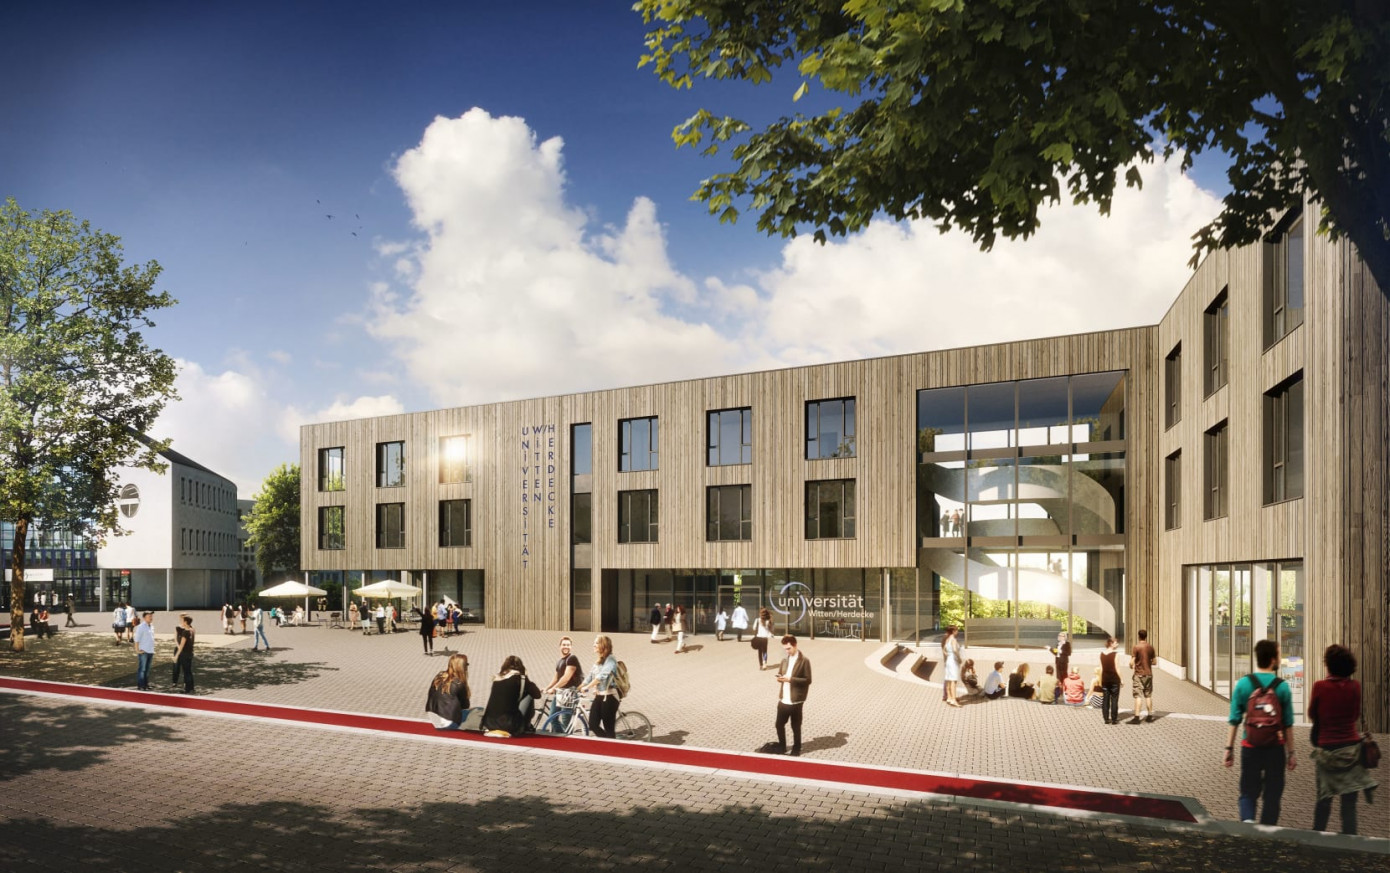 ZÜBLIN Timber to build wood campus for University of Witten/Herdecke in Germany